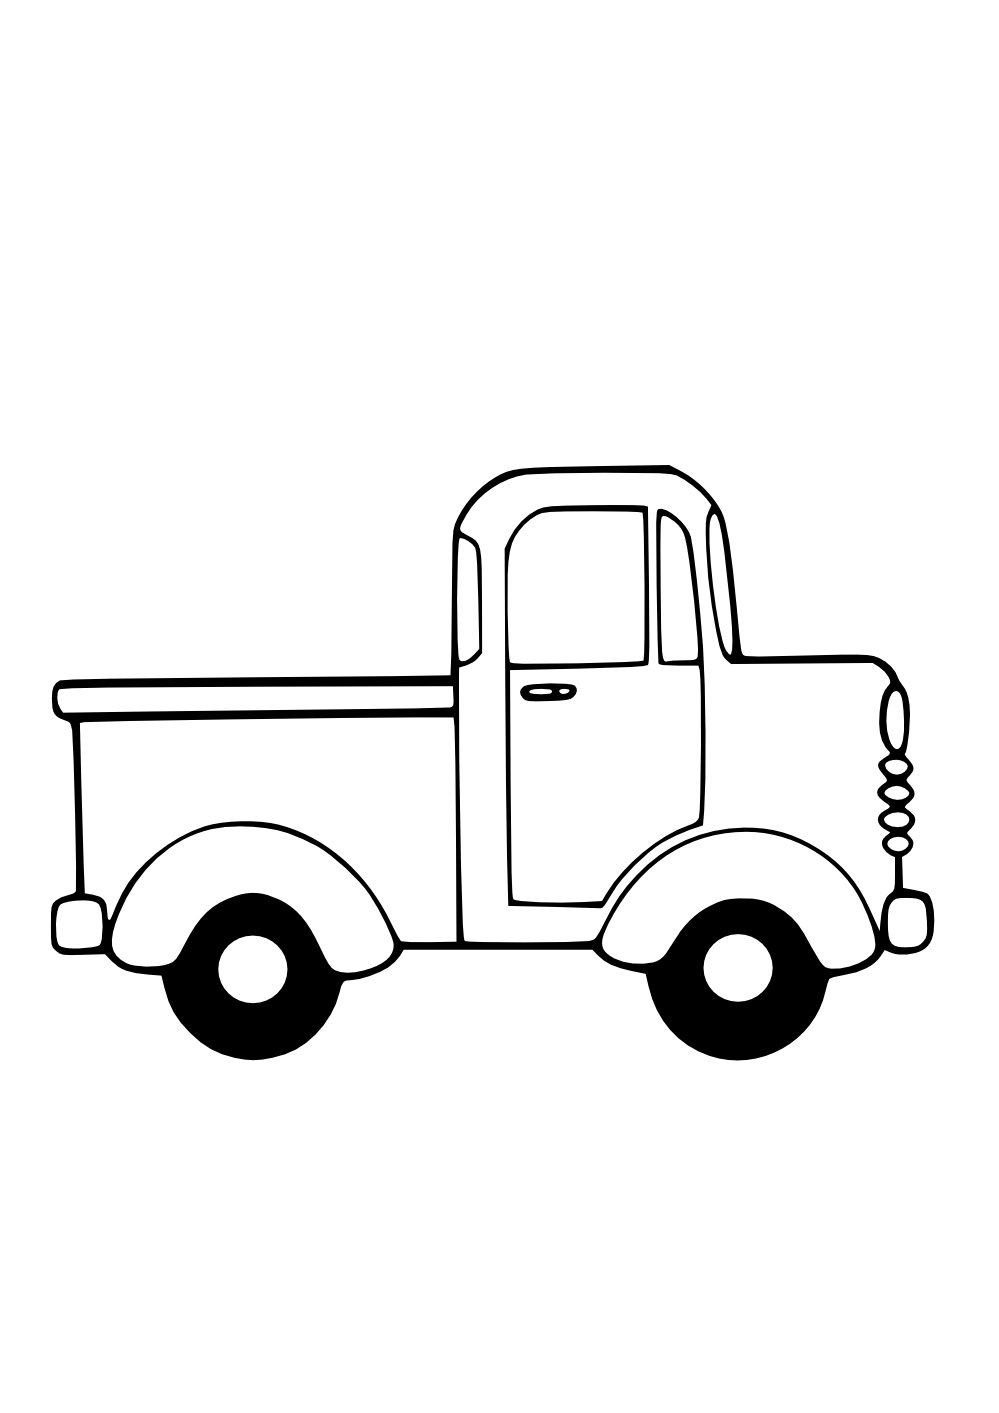 Motorcycle clipart bagger. Truck black and white